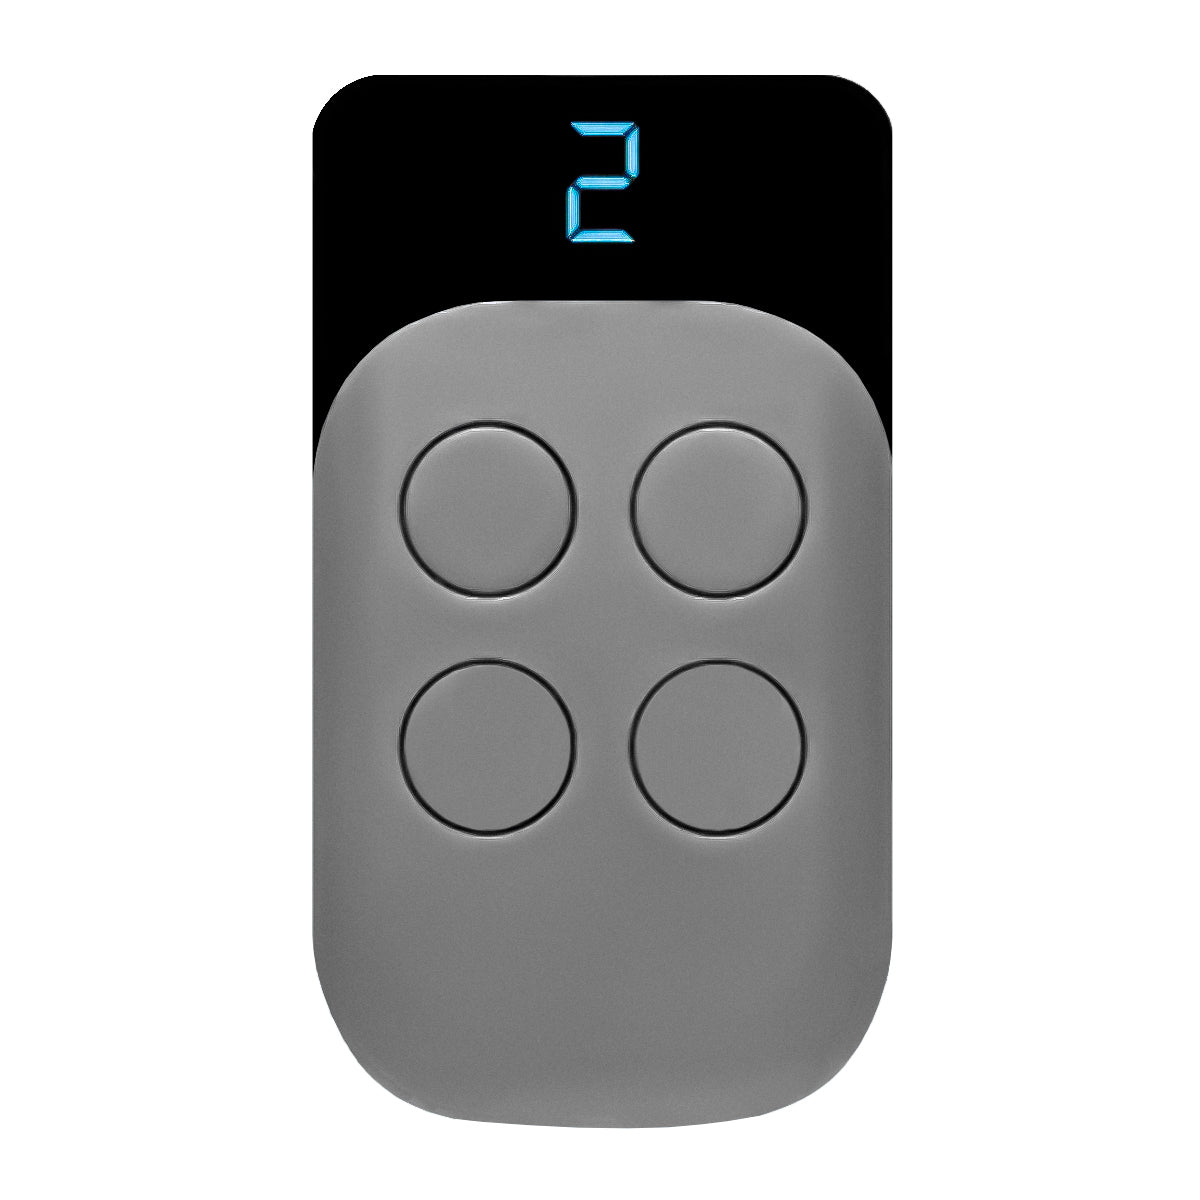 LIFE Rolling code remote control, fixed frequency 433.92 MHz, programmable self-learning gate opener, 2 independent memories, duplicates up to 8 programs